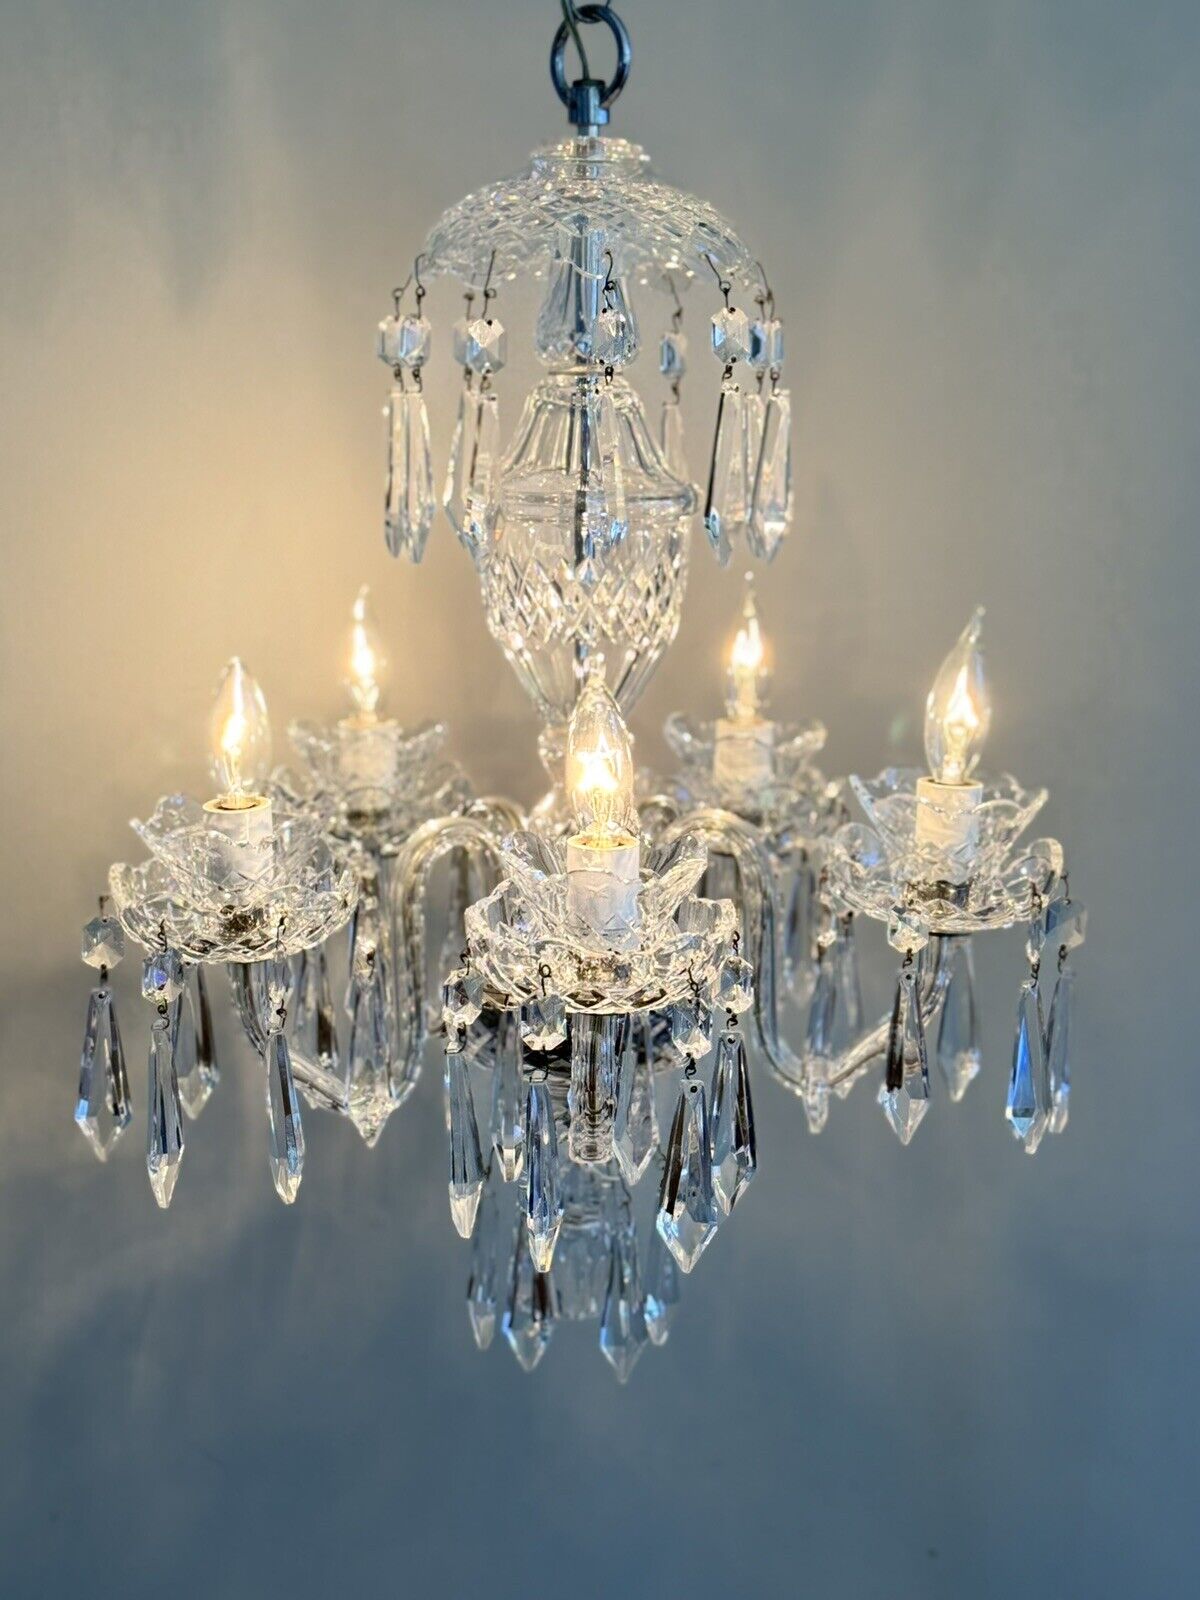 AVOCA WATERFORD Authentic Crystal Chandelier 5 Arm Ceiling Light